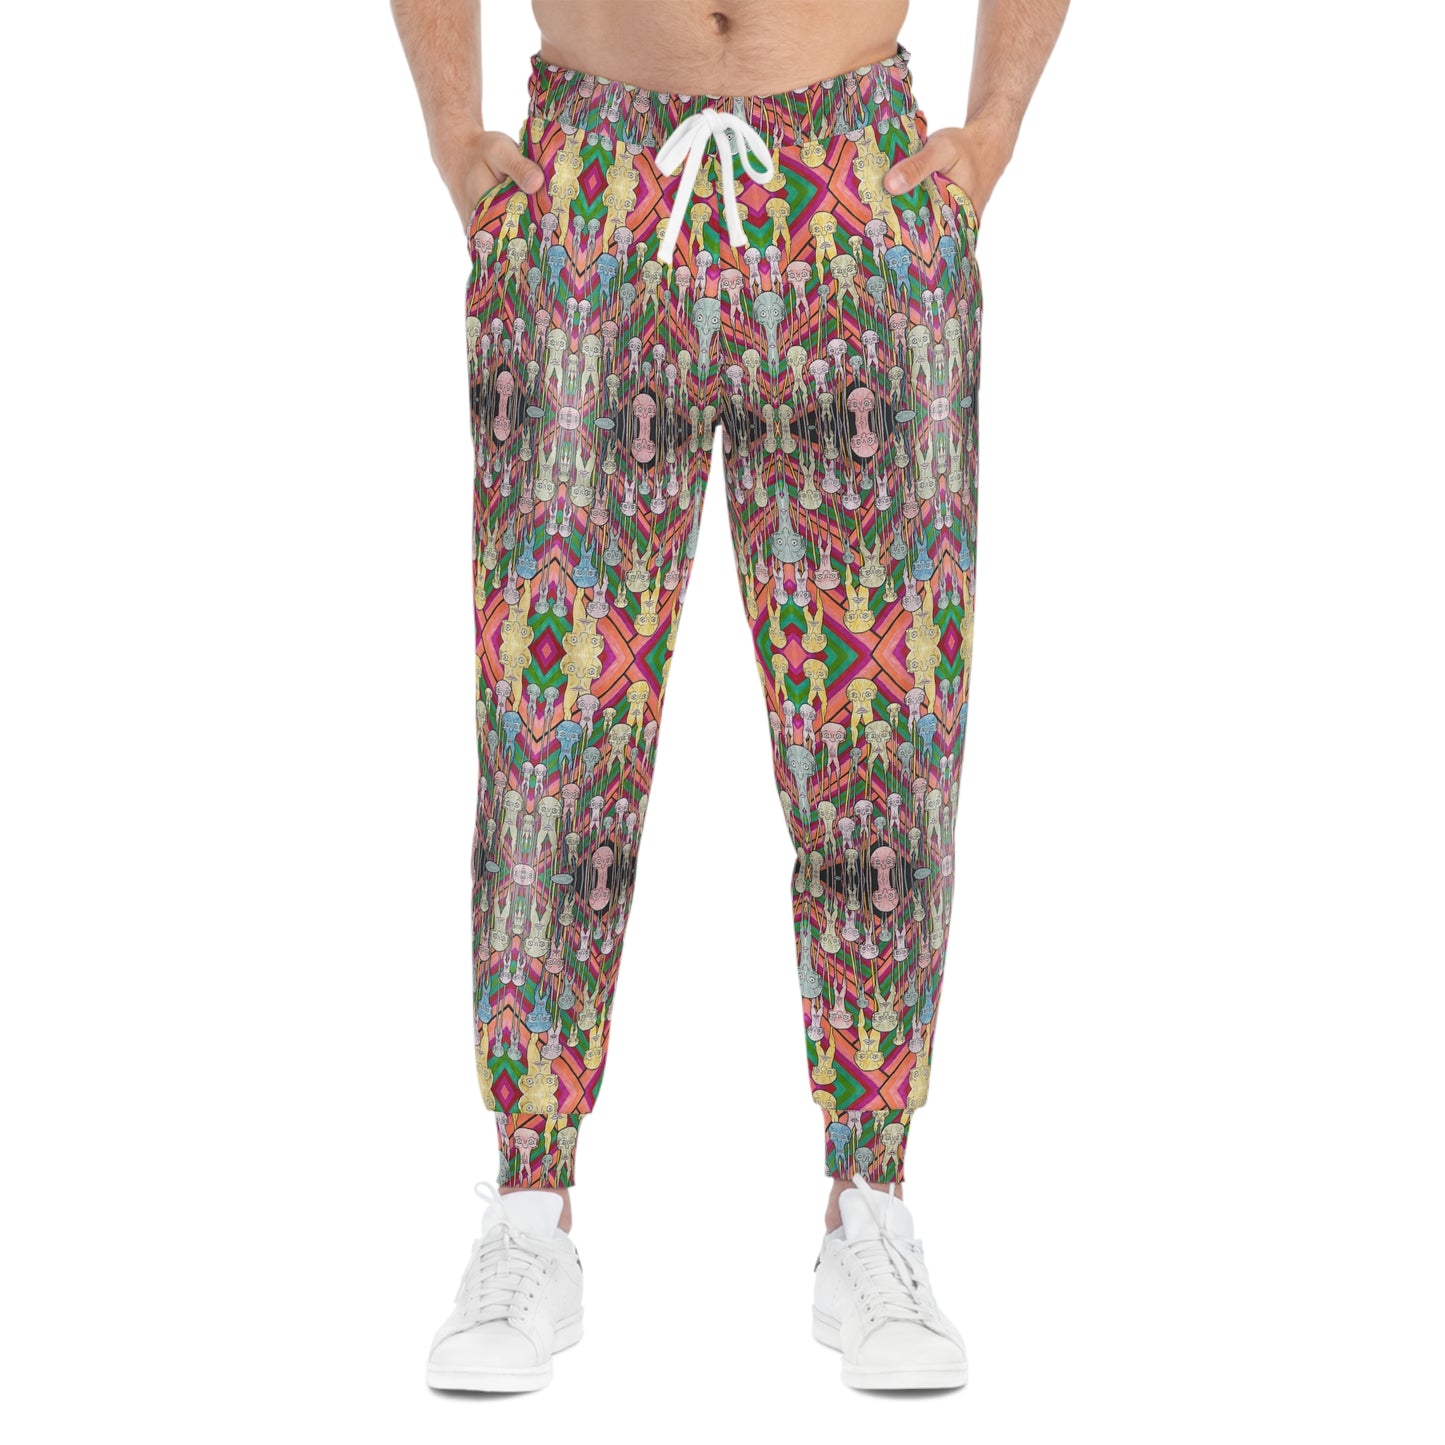 "Too Many Faces" Athletic Joggers